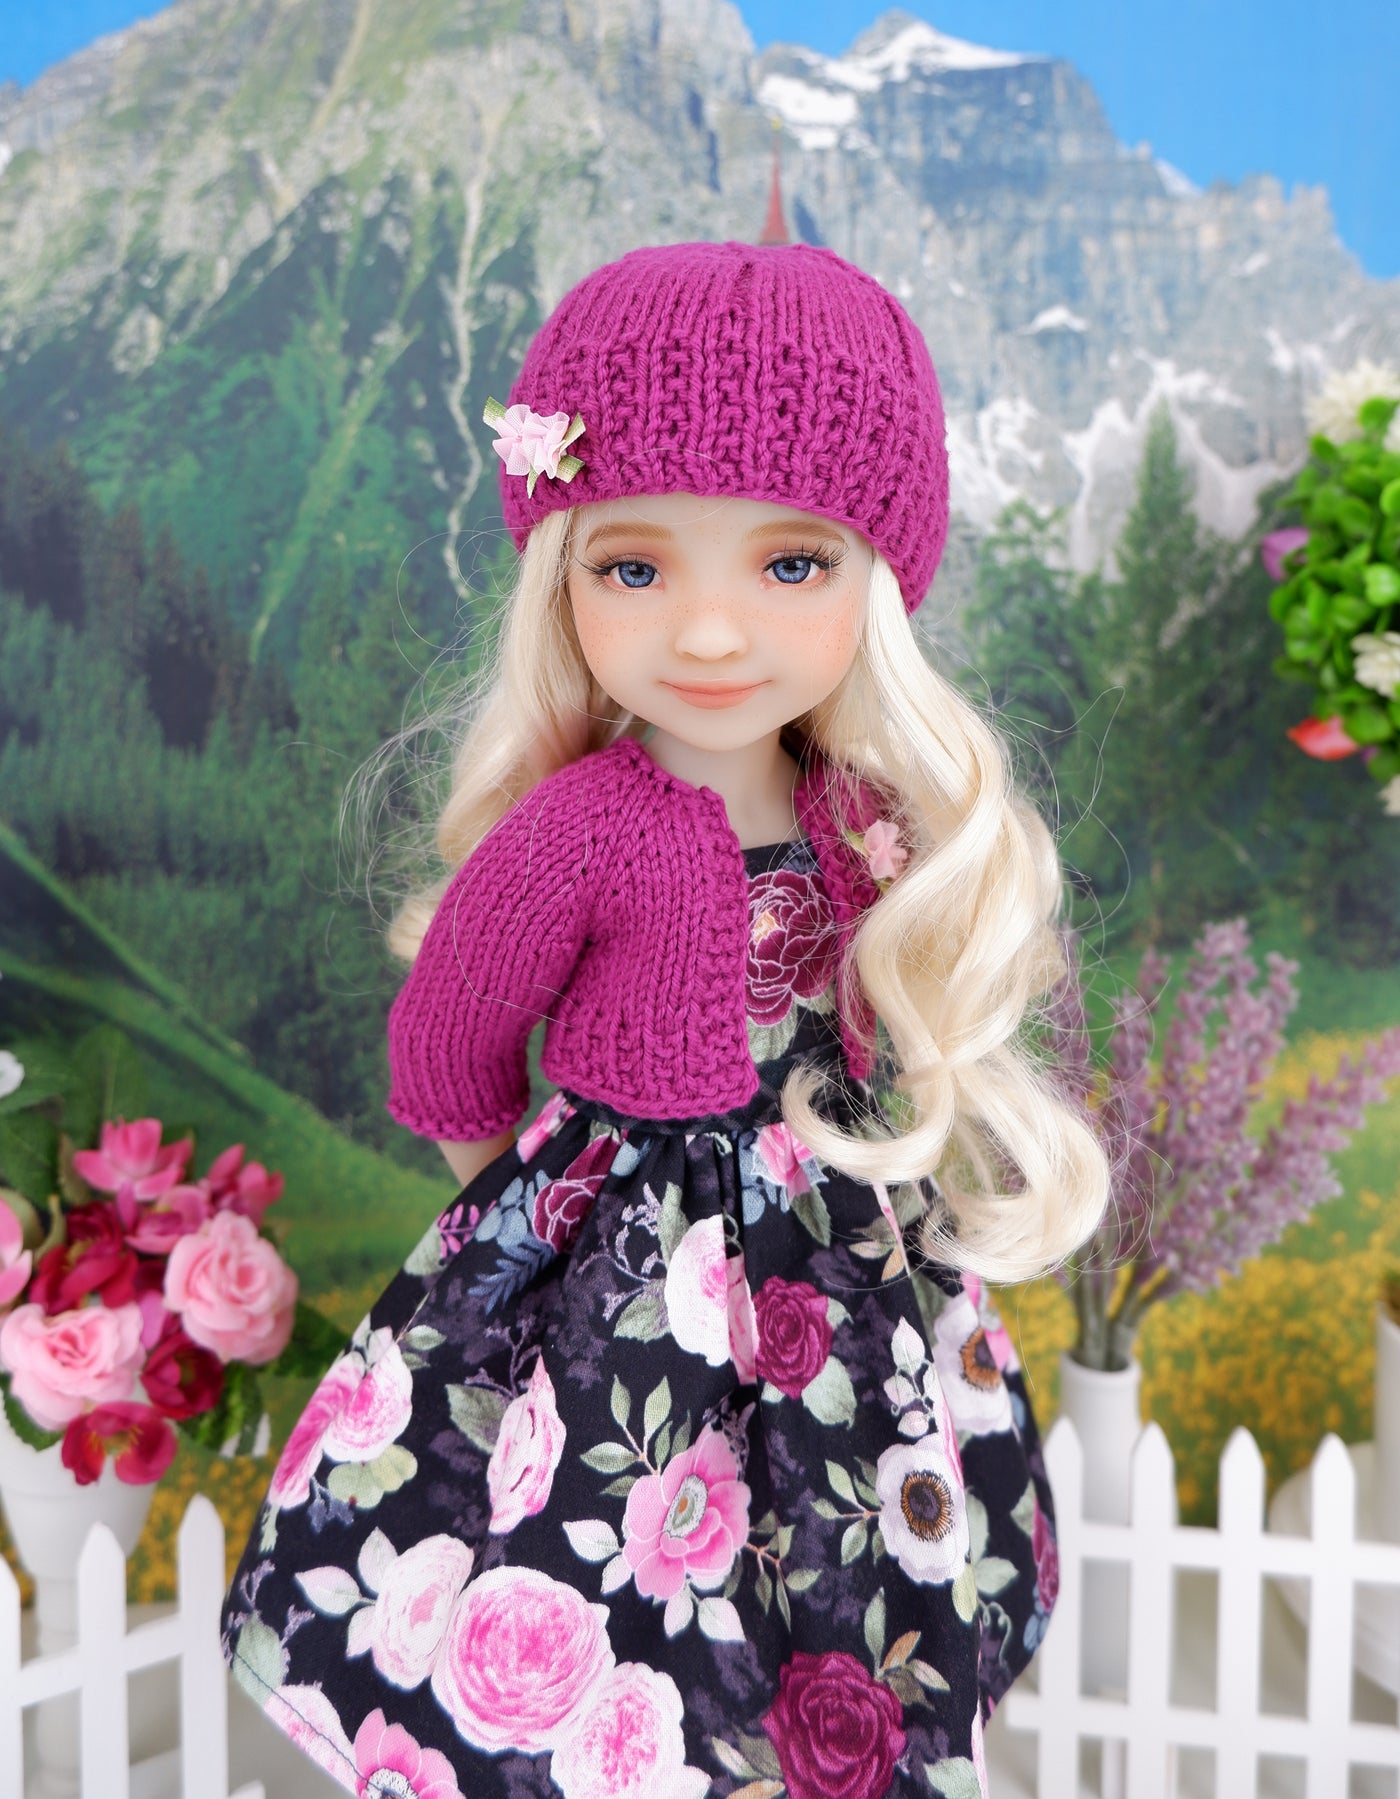 Majestic Roses - dress and sweater set with shoes for Ruby Red Fashion Friends doll